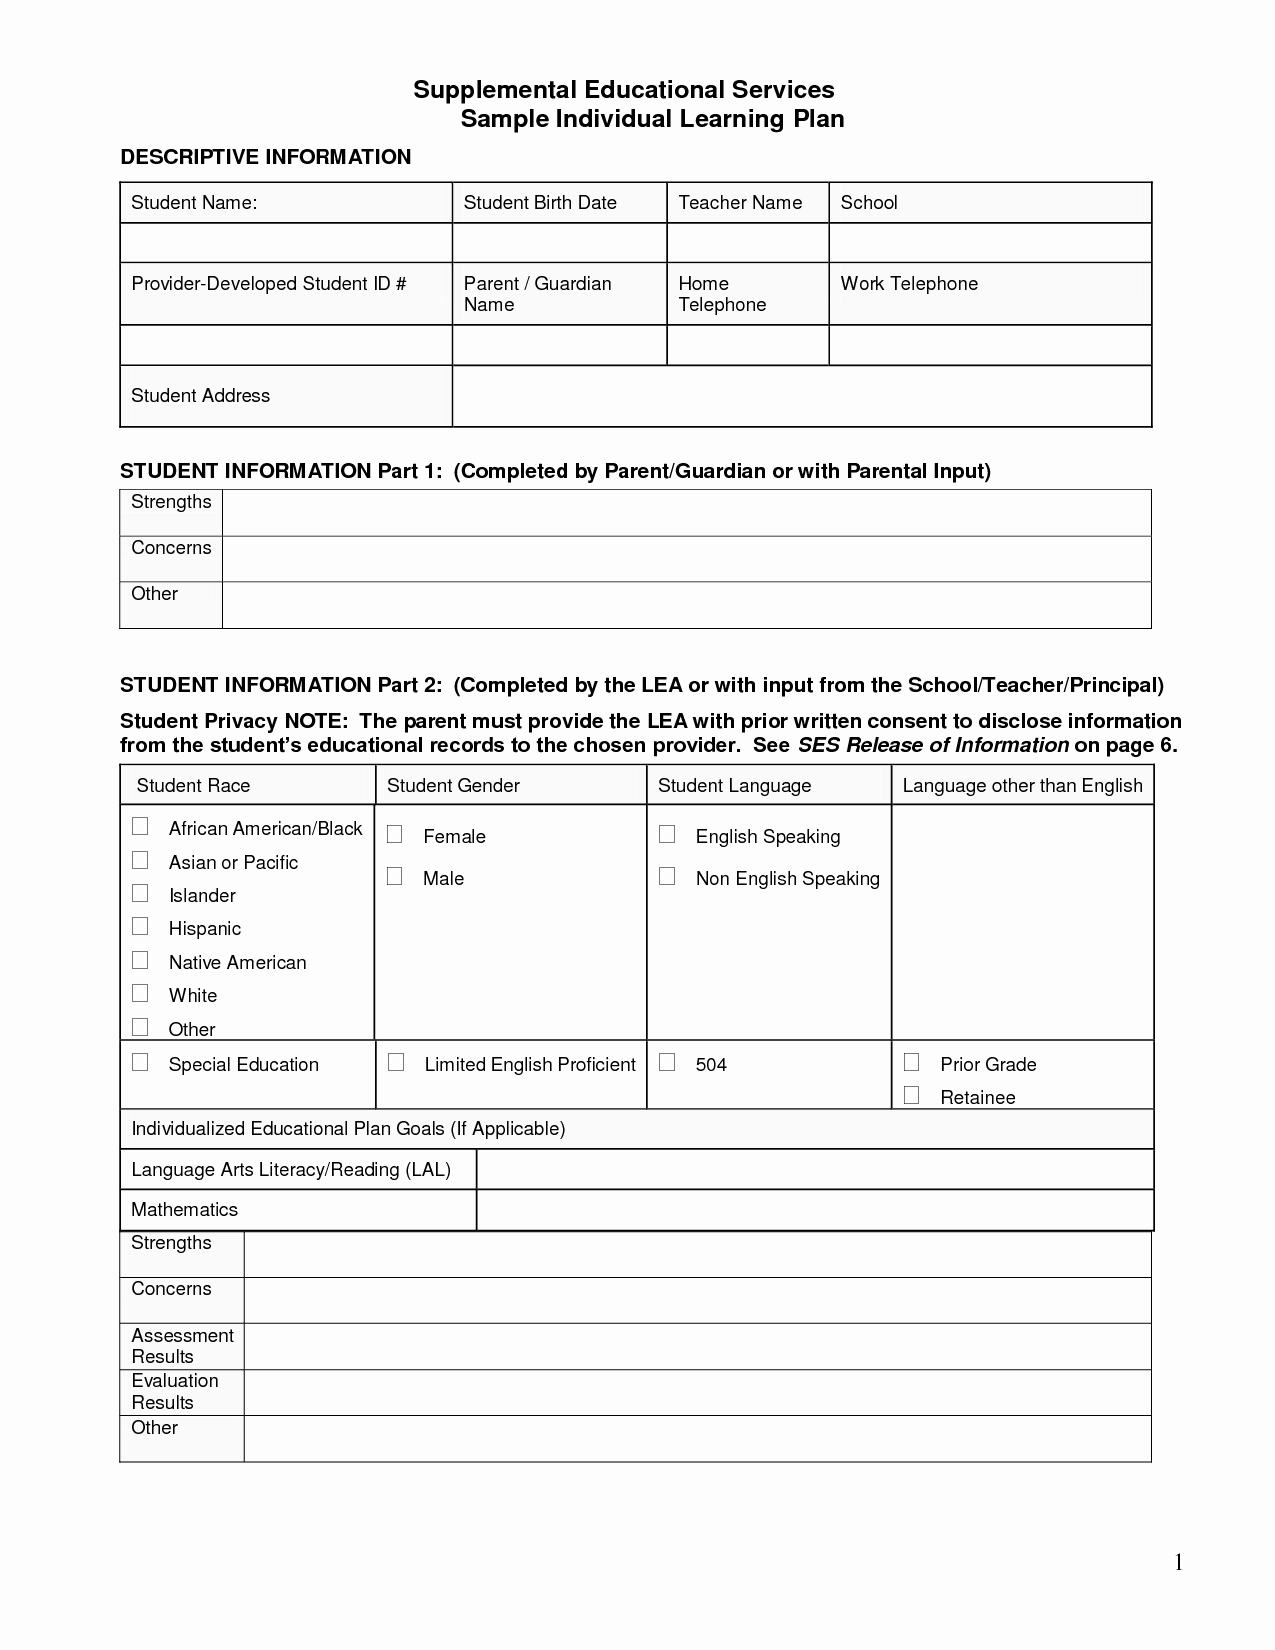 Personal Learning Plan Template Unique Best S Of Individual Work Plan for Teachers Individual Learning Plan Template Individual